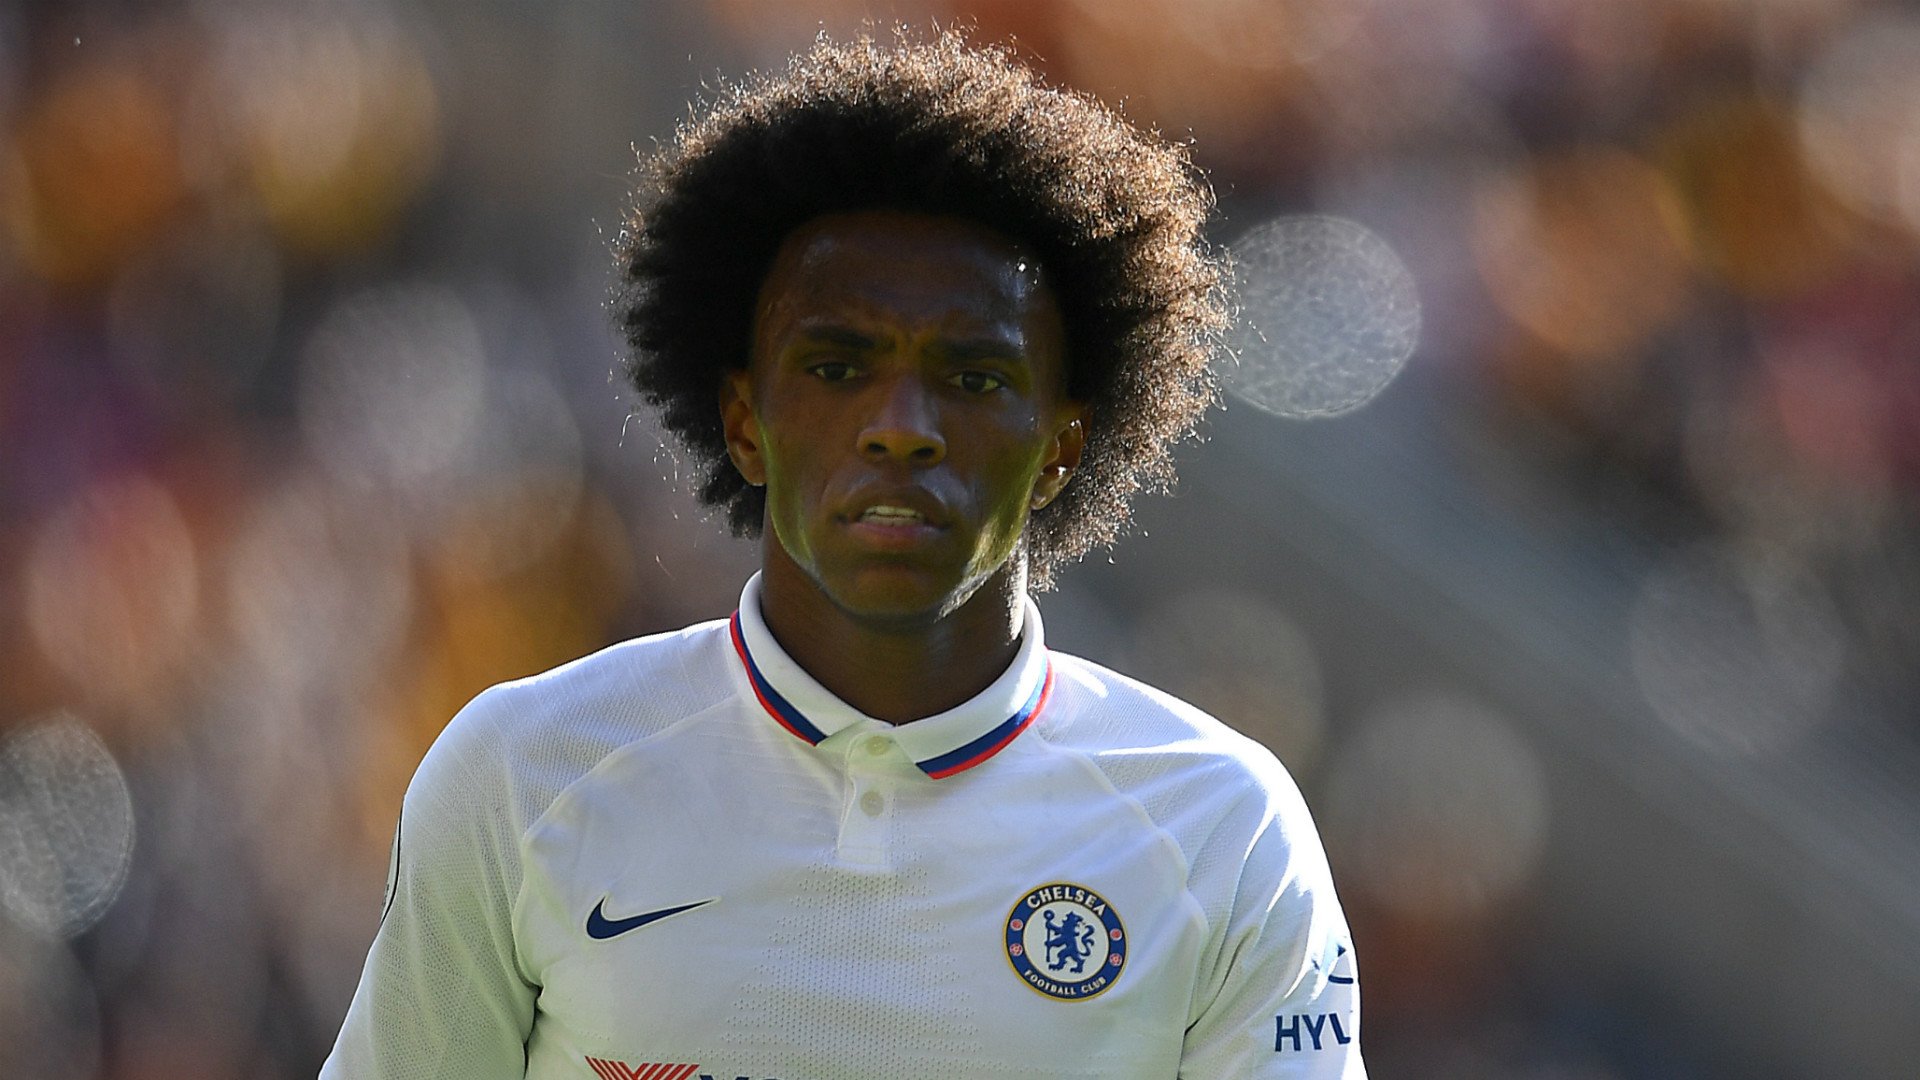 'My wish is to stay at Chelsea' - Willian confirms contract talks ongoing amid Barcelona links